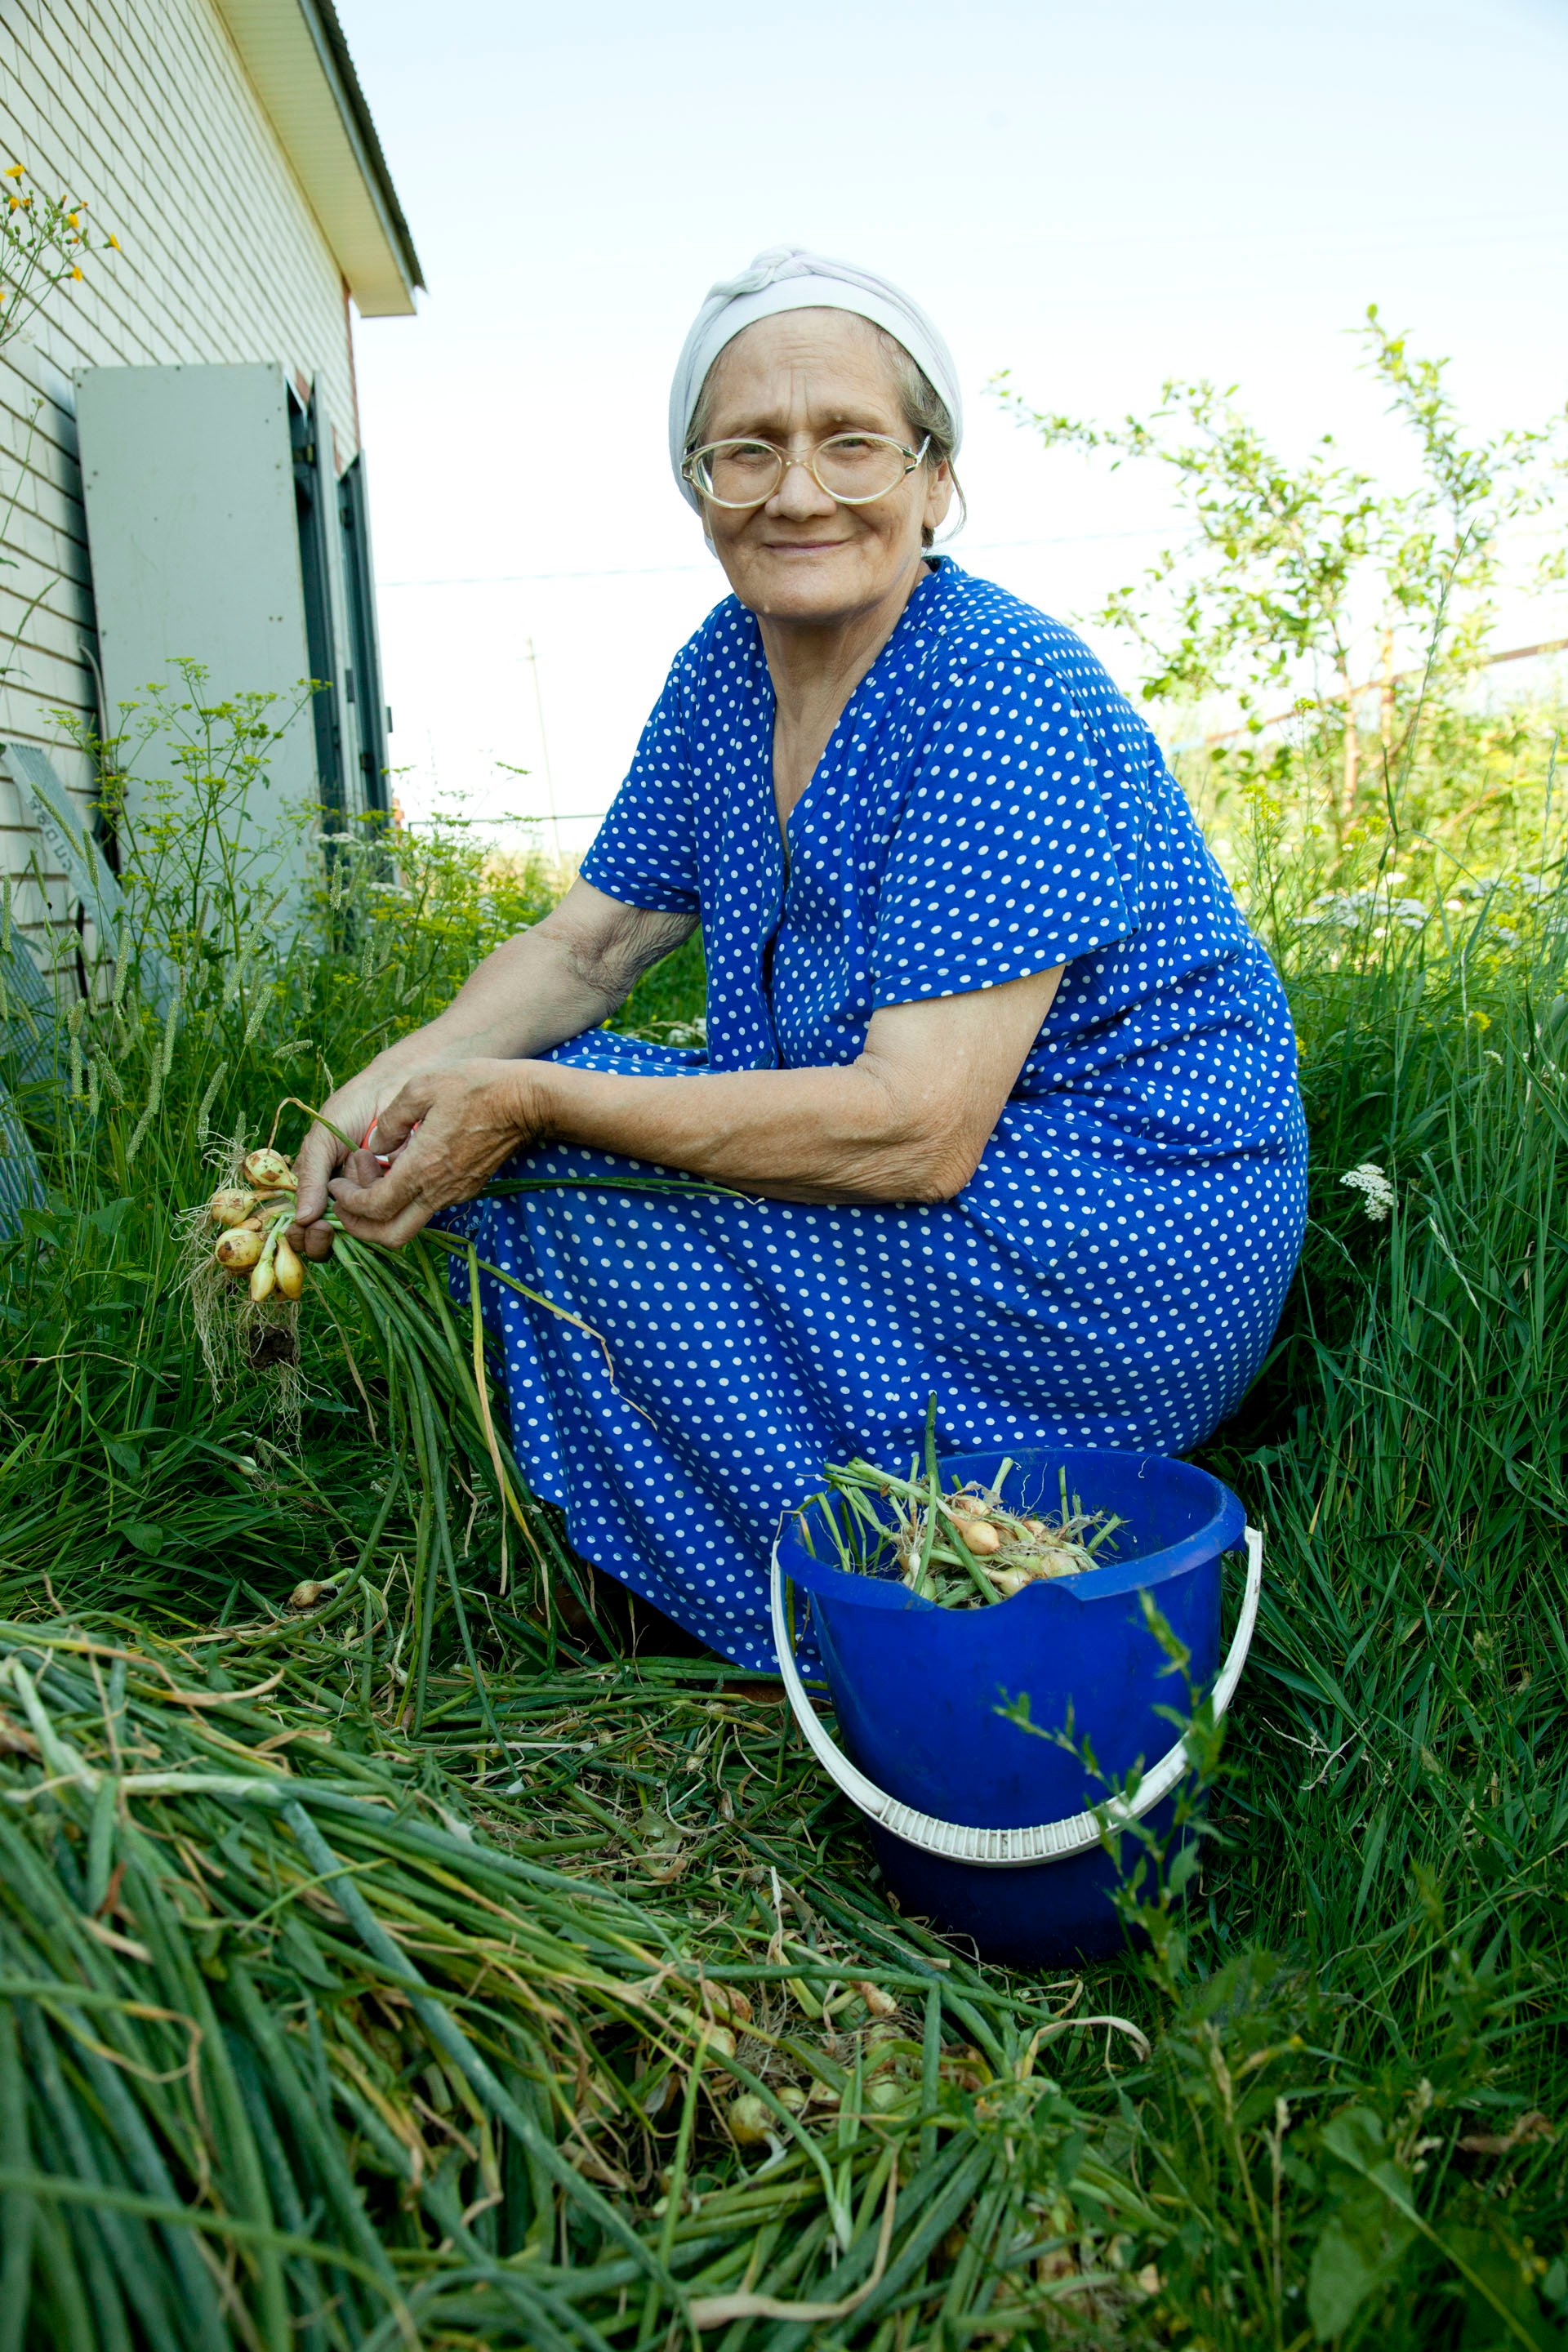 During the harvest season, the babushkas (grandmothers) of Kamskie-Polyani get together and go from home to home to help gather and preserve the large garden plots necessary for survival in this town without an economy